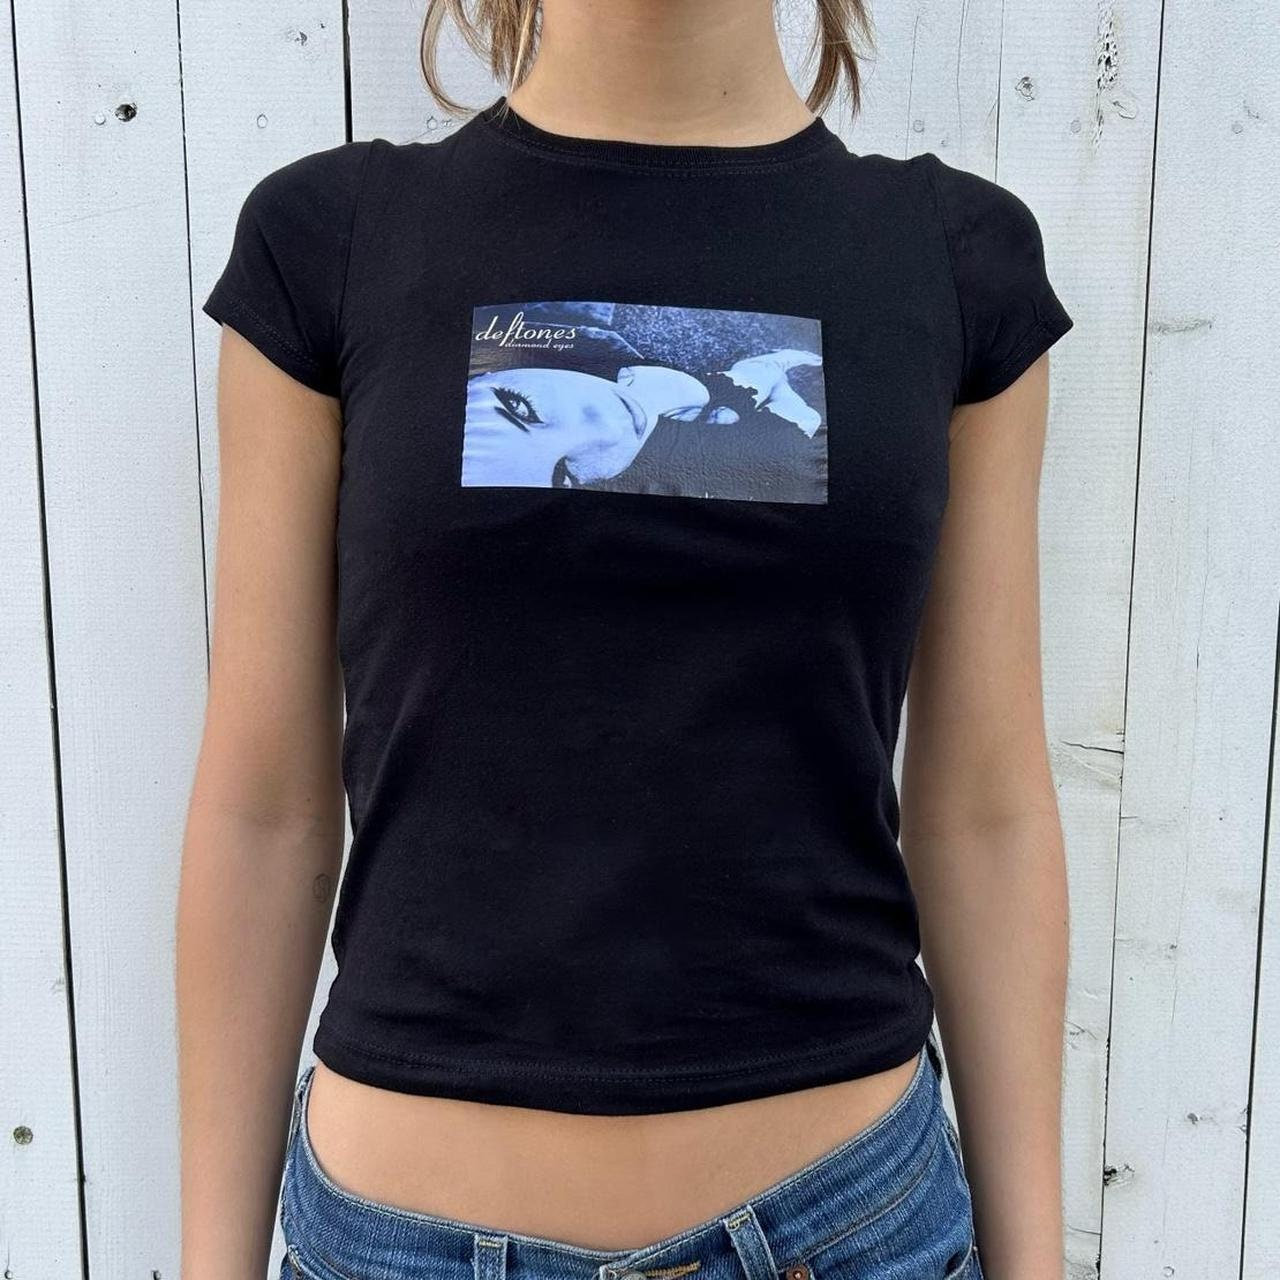 Vintage-inspired Deftones graphic baby tee for Y2K fashion enthusiasts